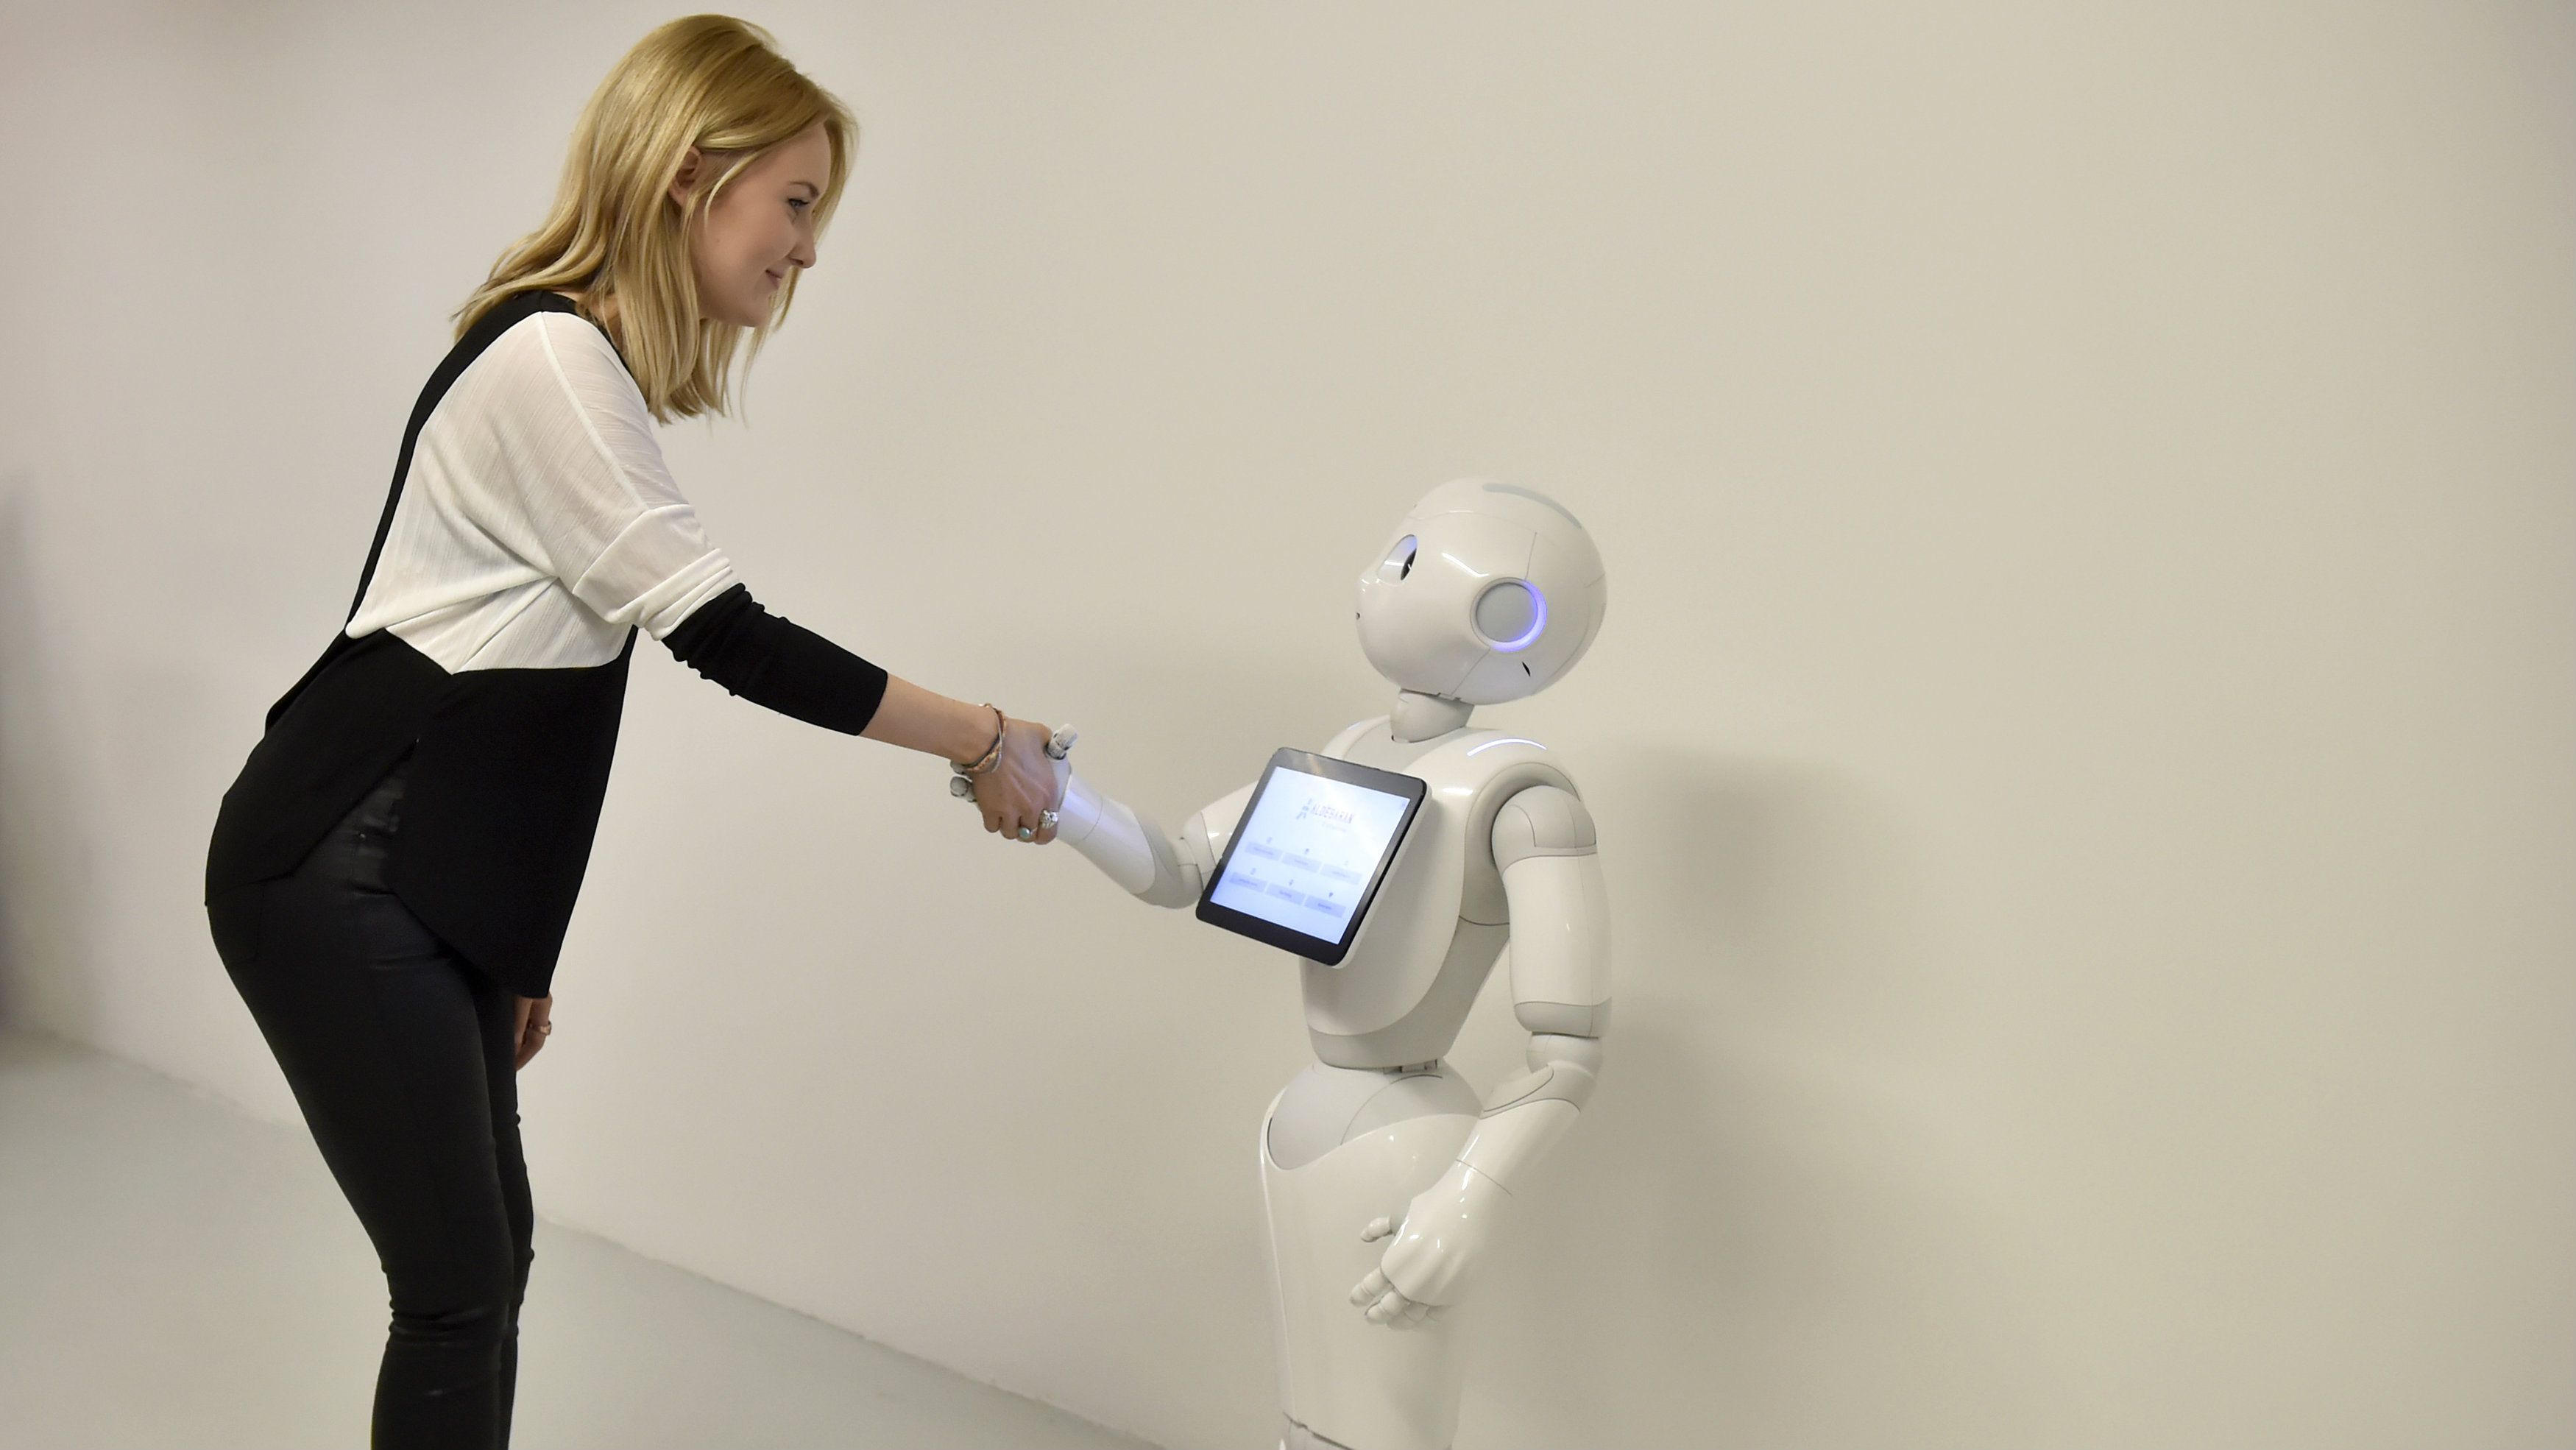 A press officer poses with 'Pepper' the Humanoid Robot at the 'World of Me: Store of the near future installation' in London, Britain, April 13, 2016.